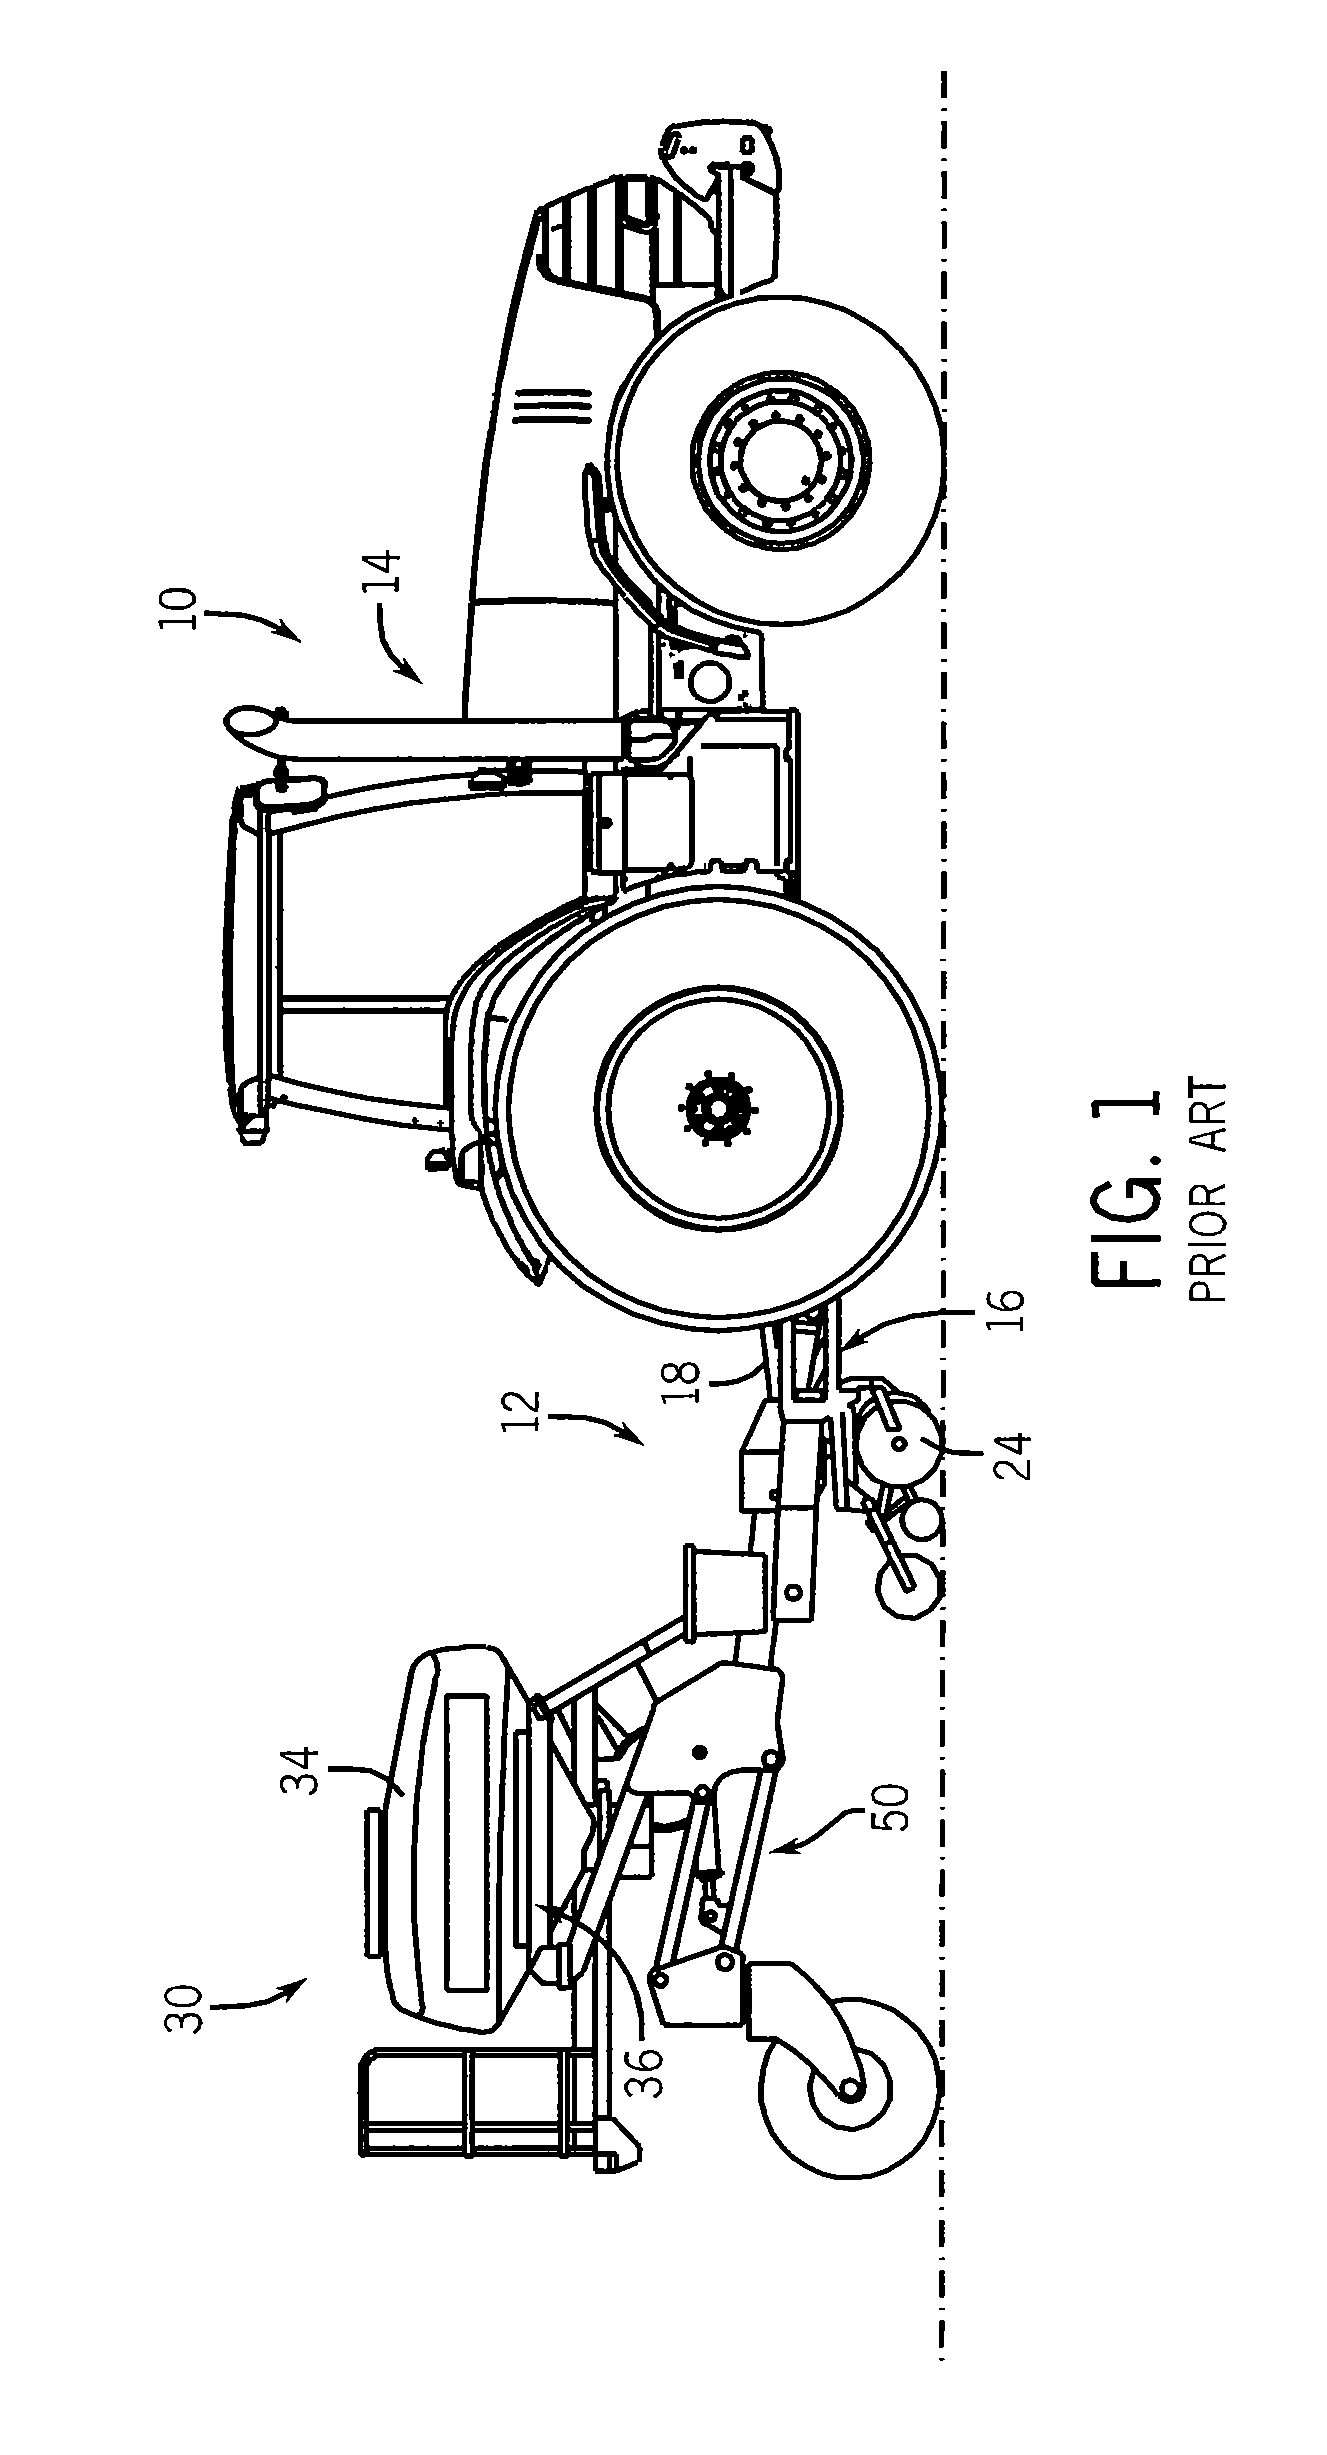 Method and apparatus for implement control of tractor hydraulics via isobus connection